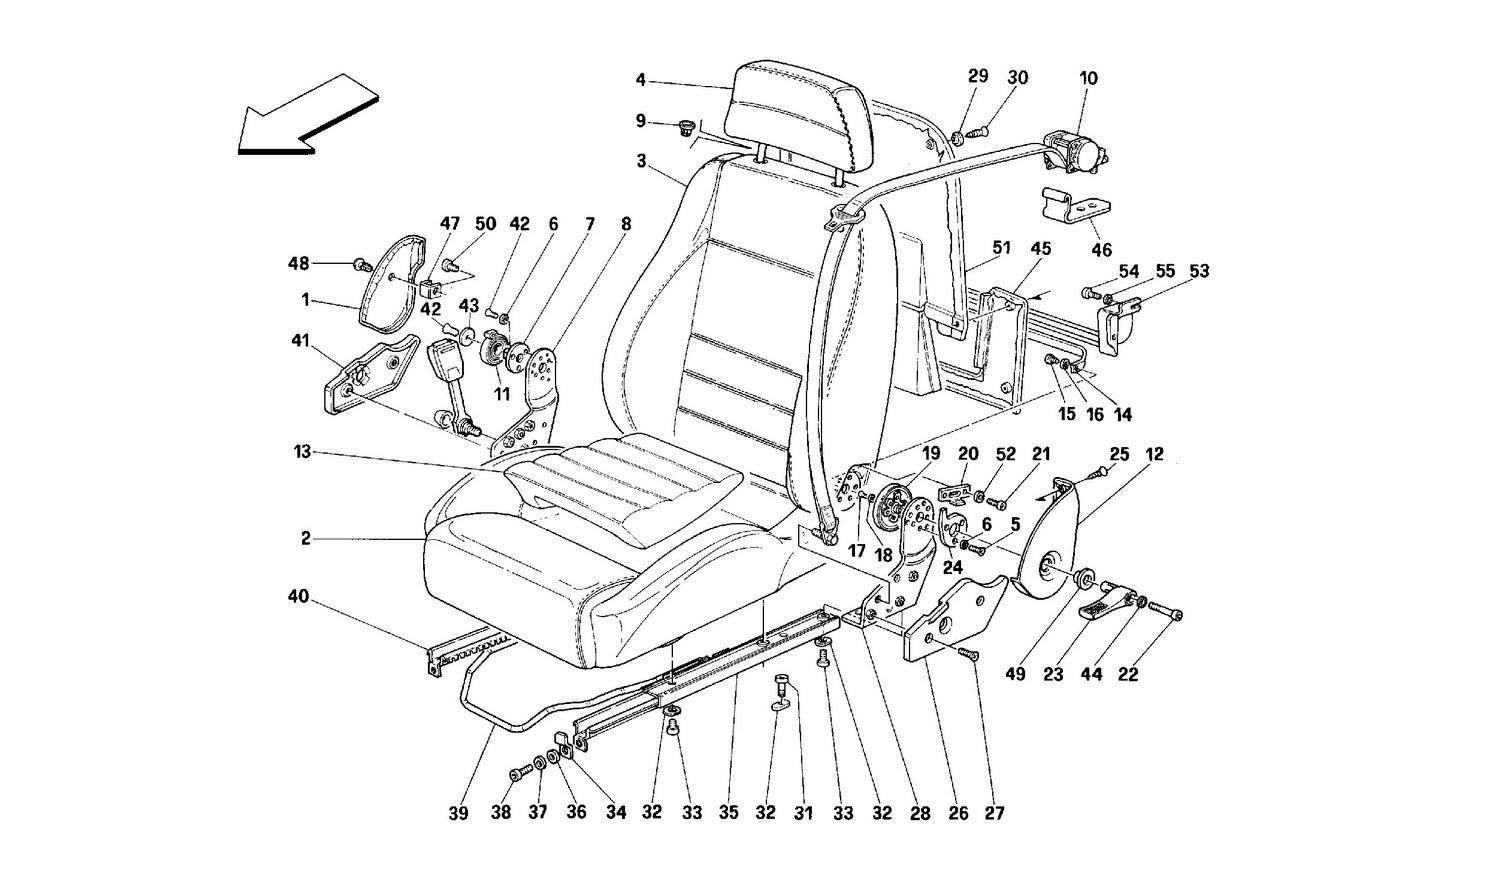 Schematic: Seats And Safety Belts -Not For Spider-